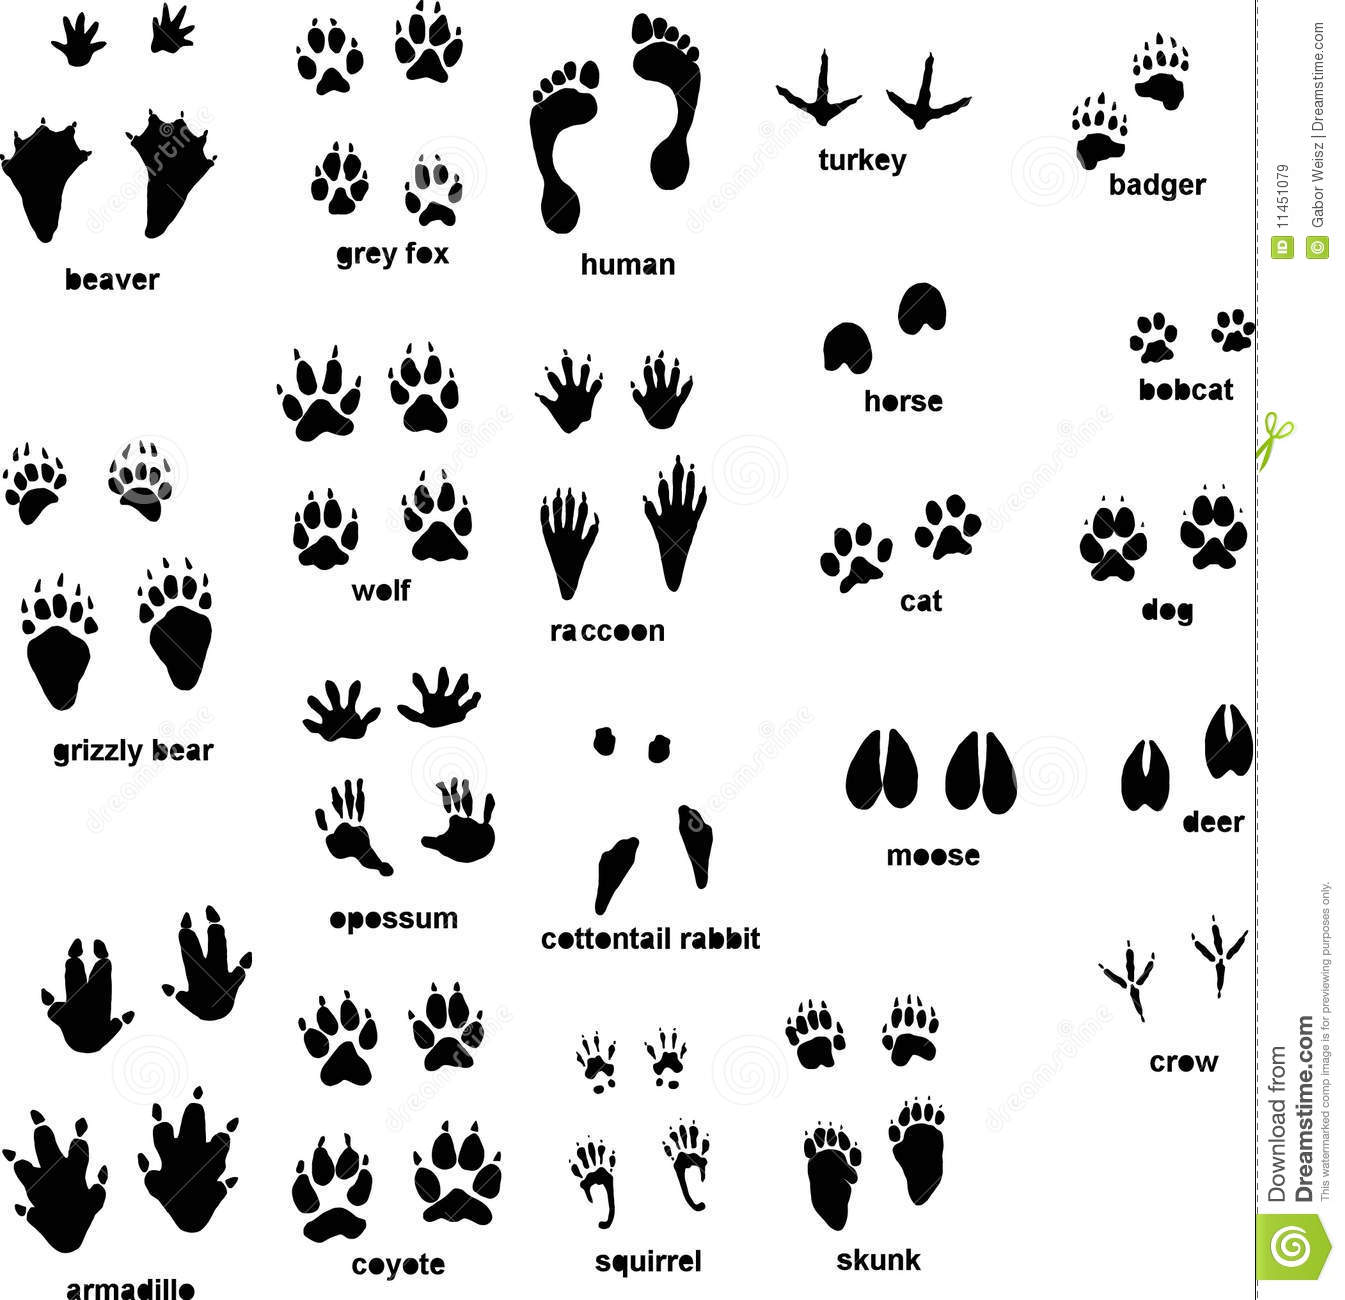 rabbit track outline clipart - Clipground